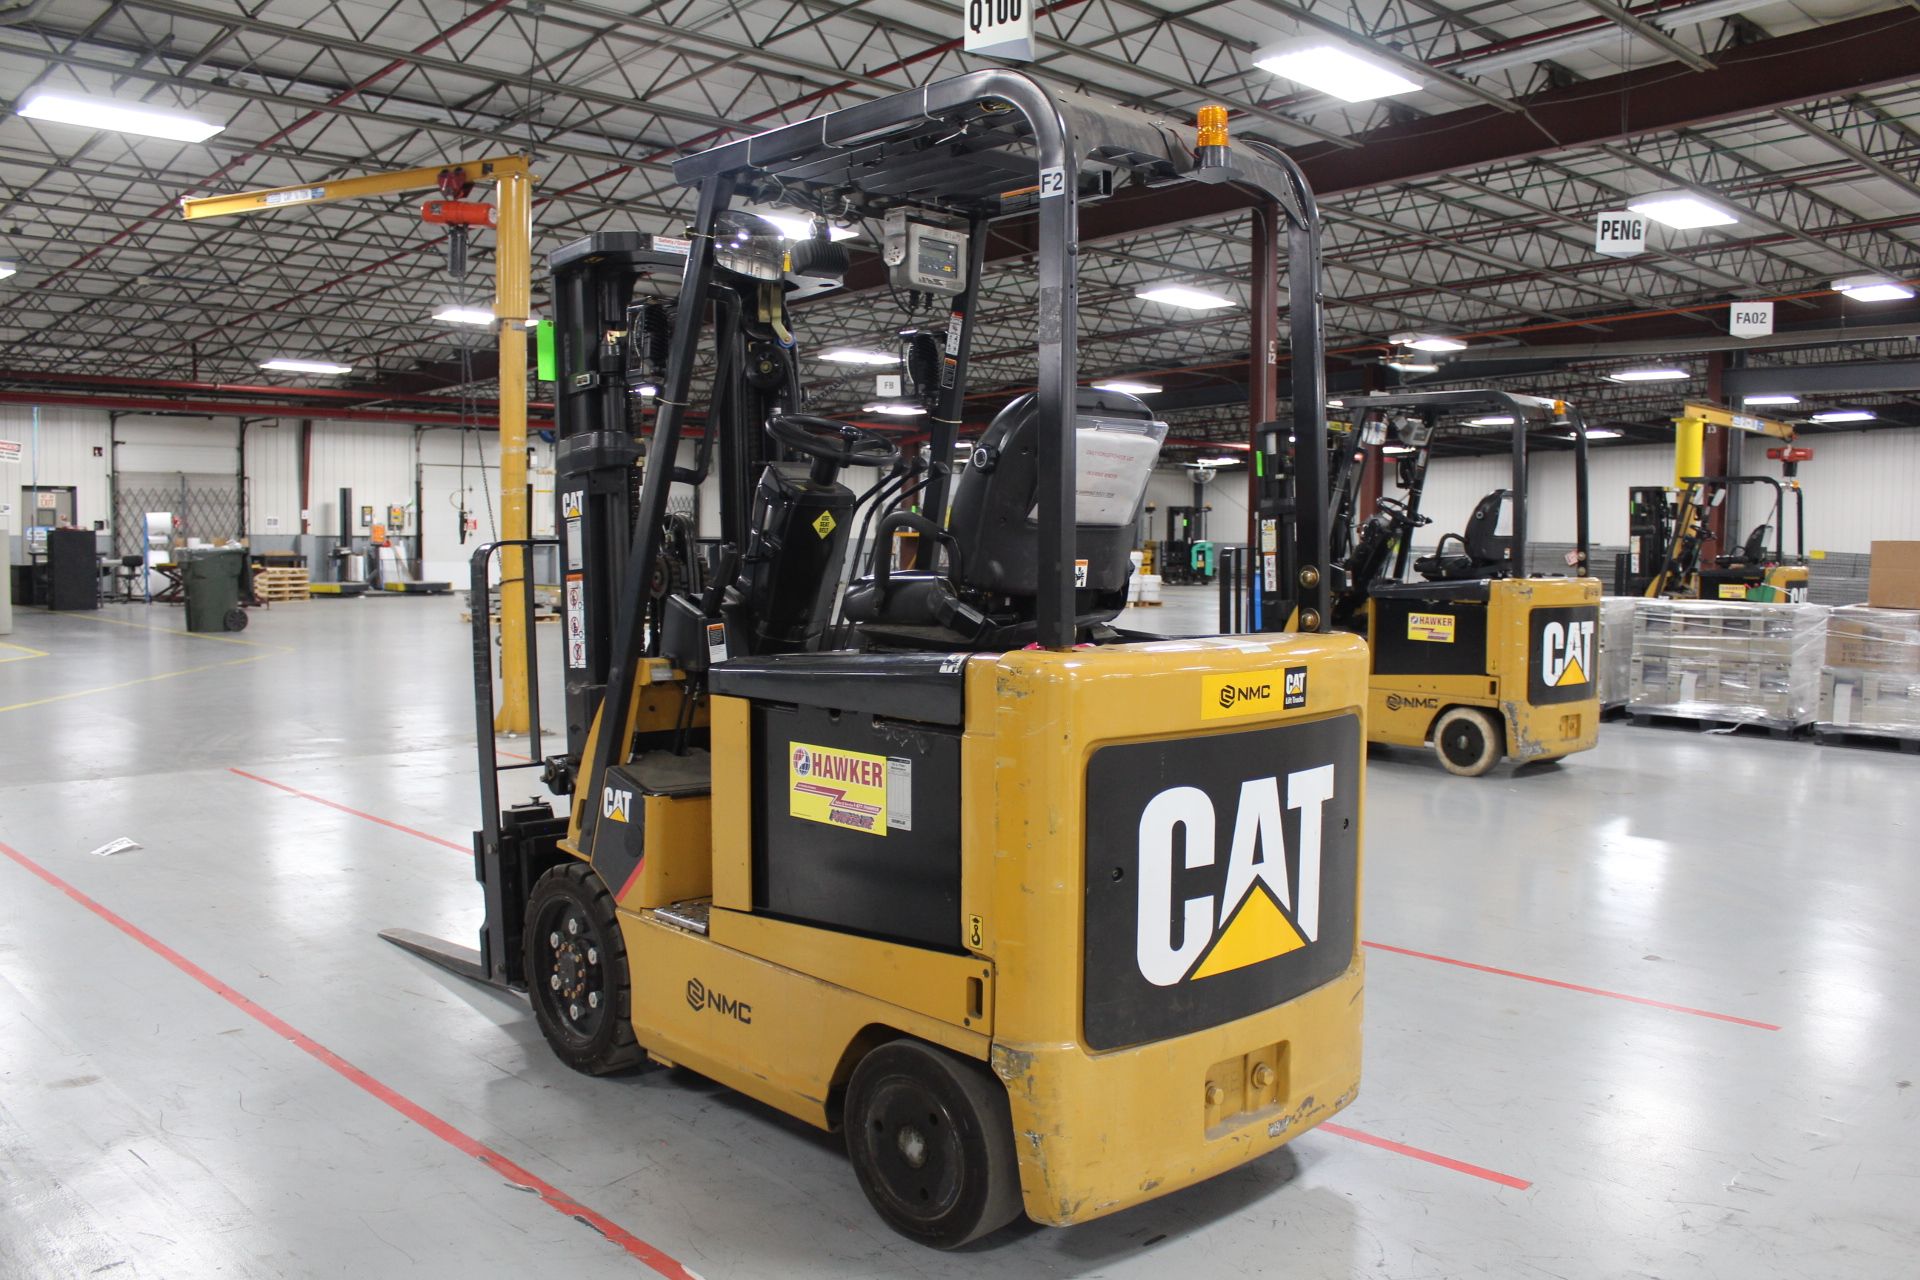 Caterpillar Model E5000-AC 4,450 Lb. Capacity Electric Forklift, S/N A4EC240780, Sit-Down Rider, - Image 4 of 4